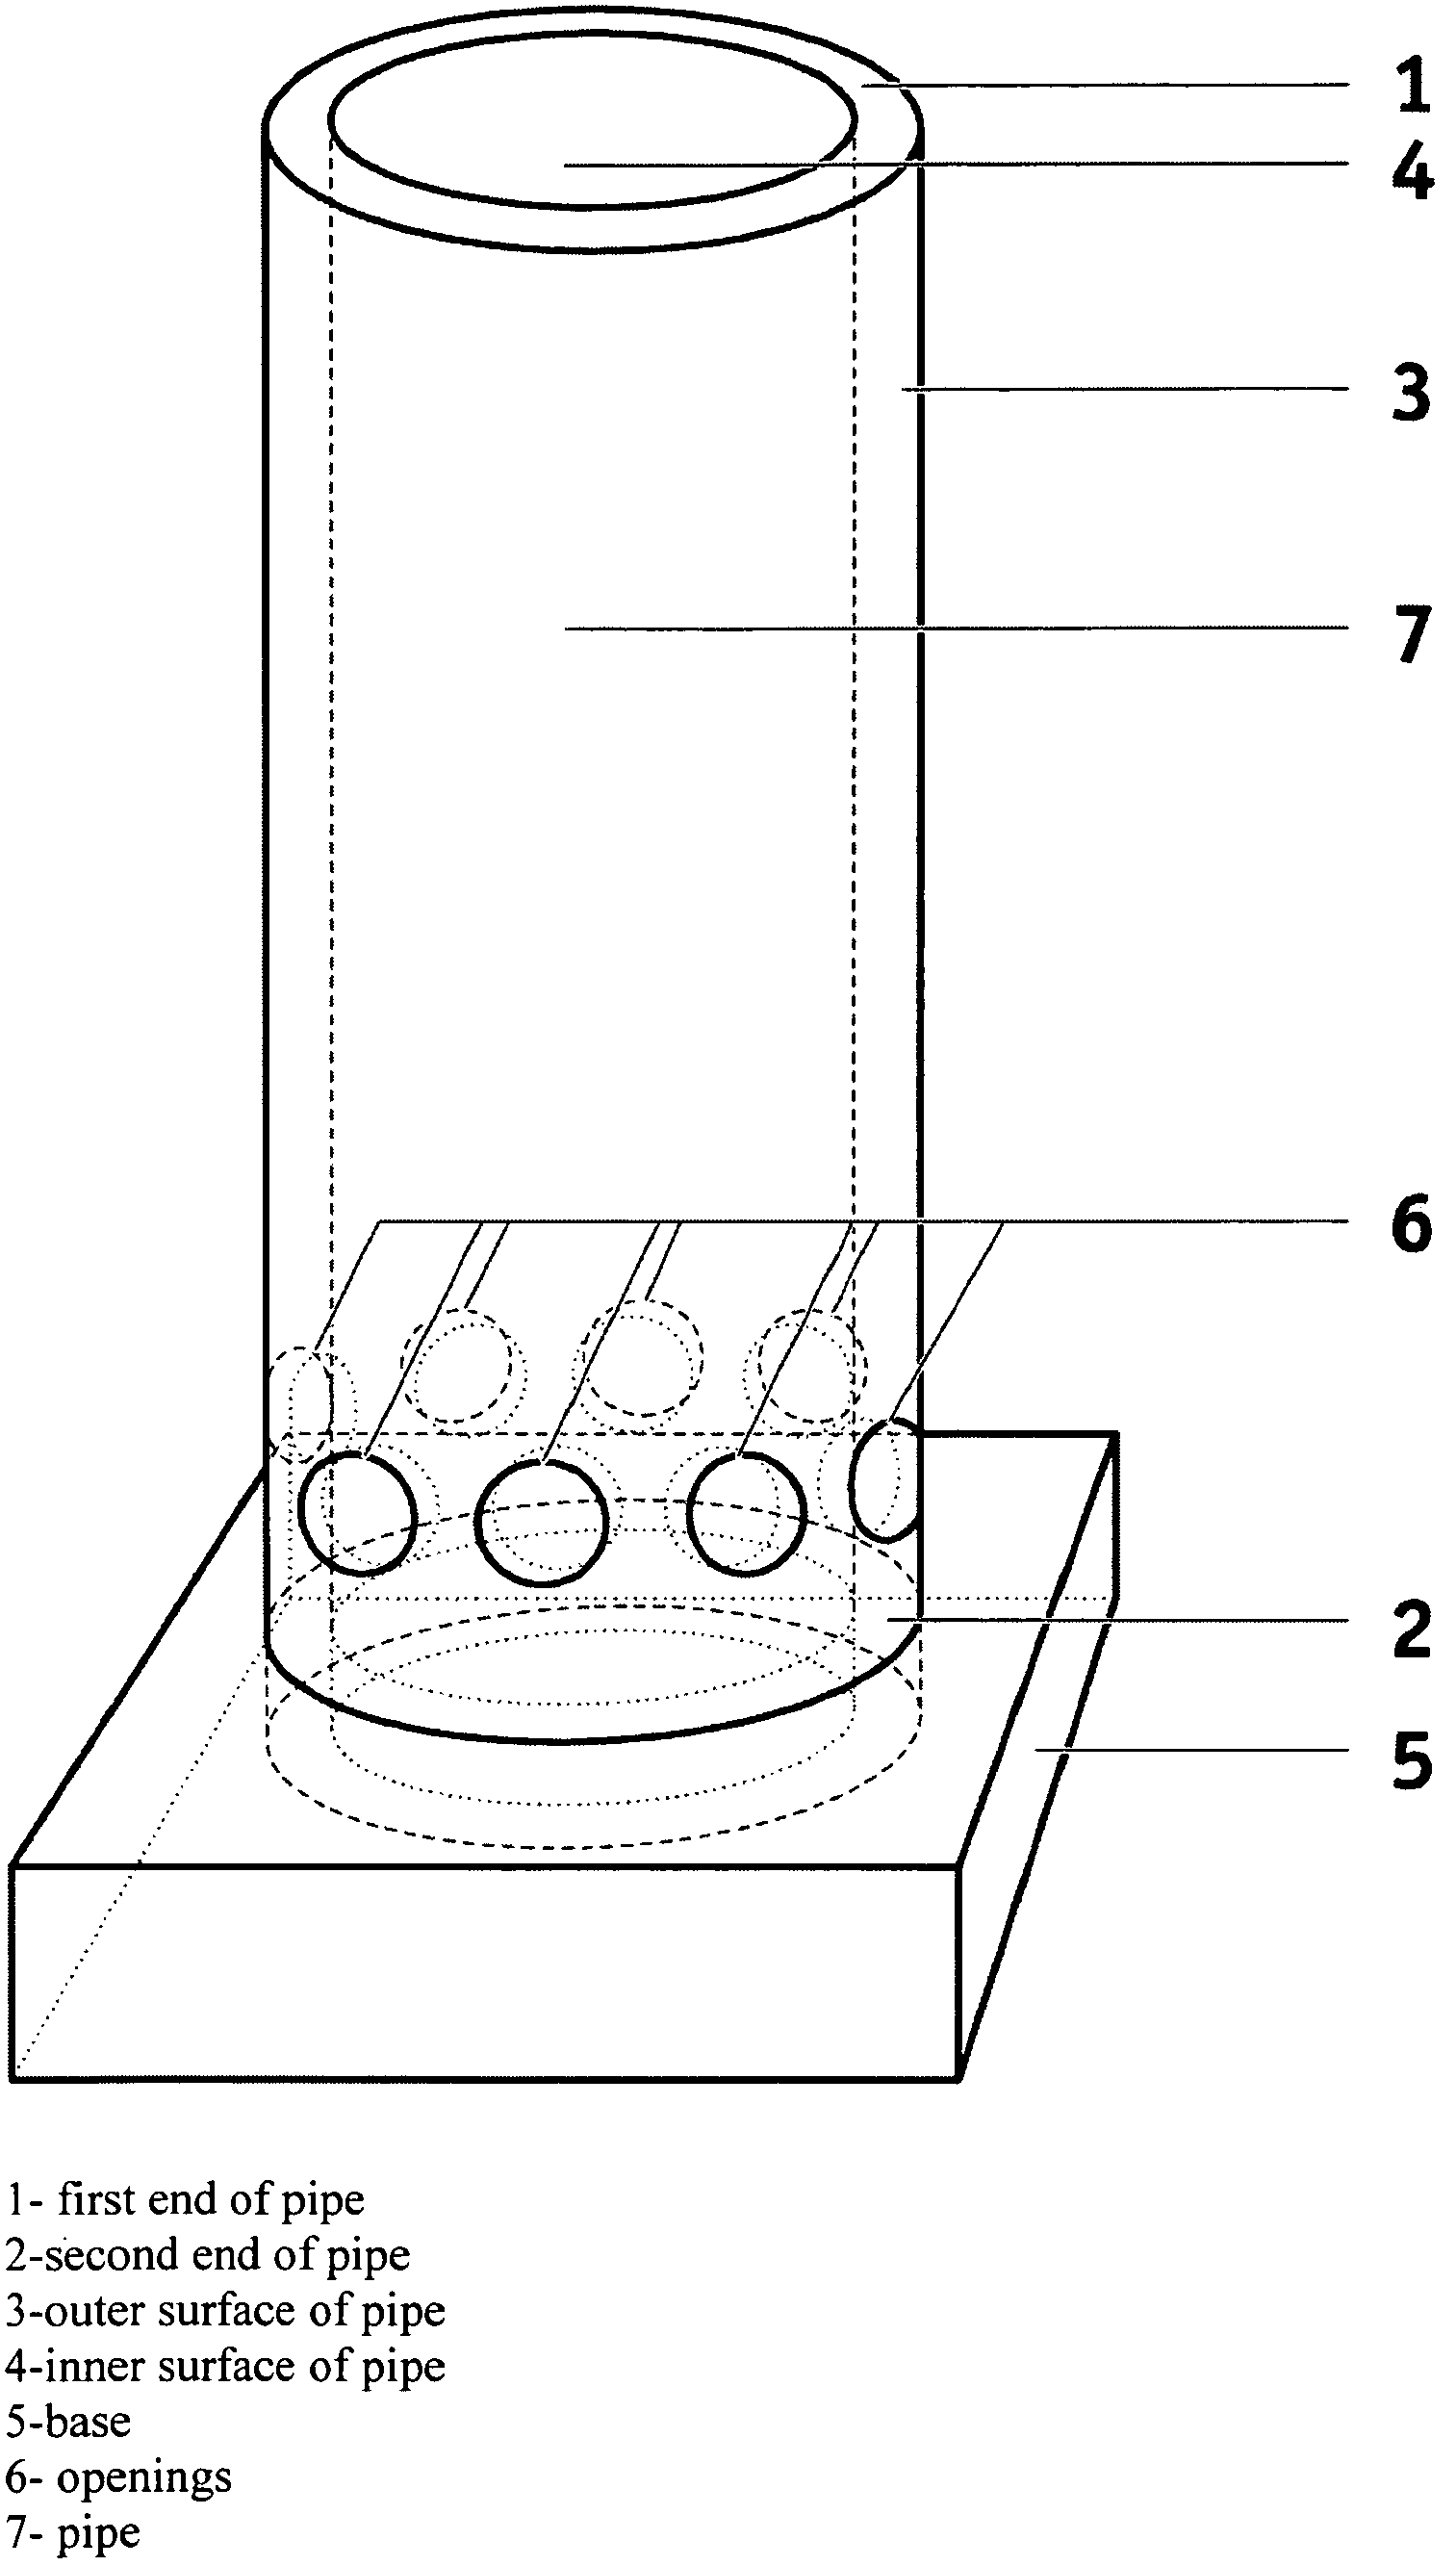 Chimney device and methods of using it to fight global warming, produce water precipitation and produce electricity